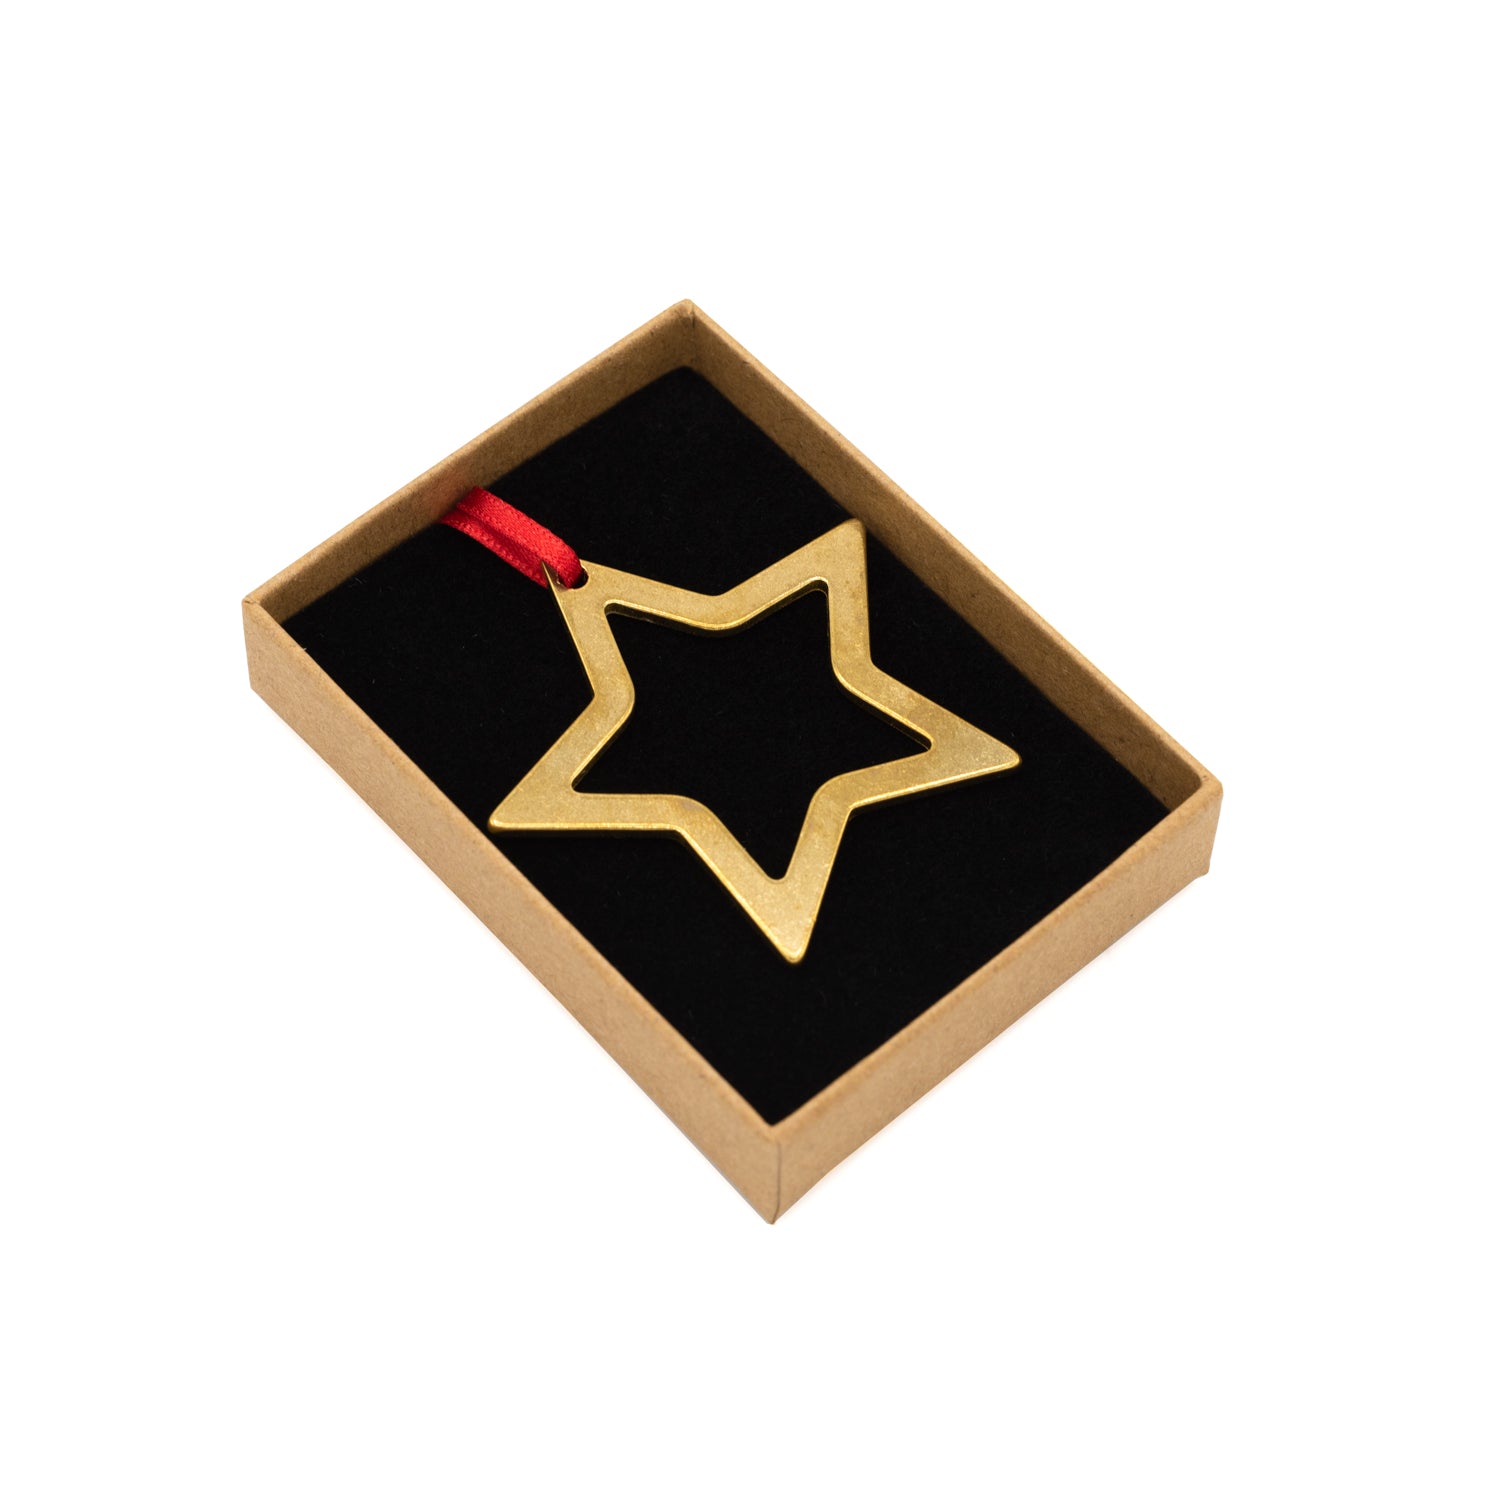 Brass star-shaped decoration with red ribbon. Photographed inside it's box against a white background.